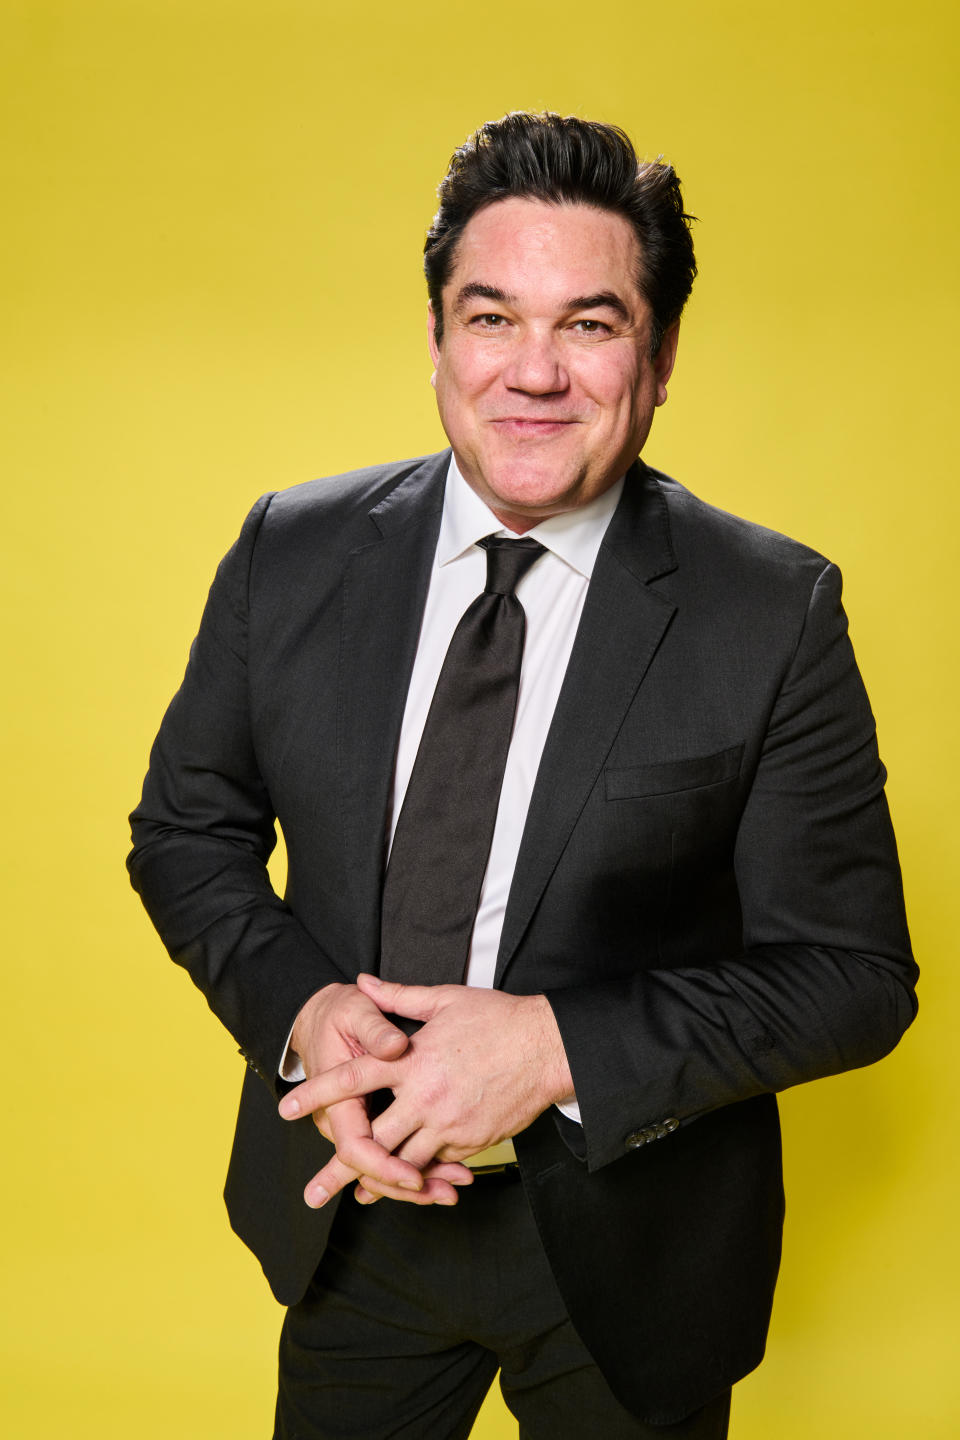 Man in suit with hands clasped, smiling against a yellow background